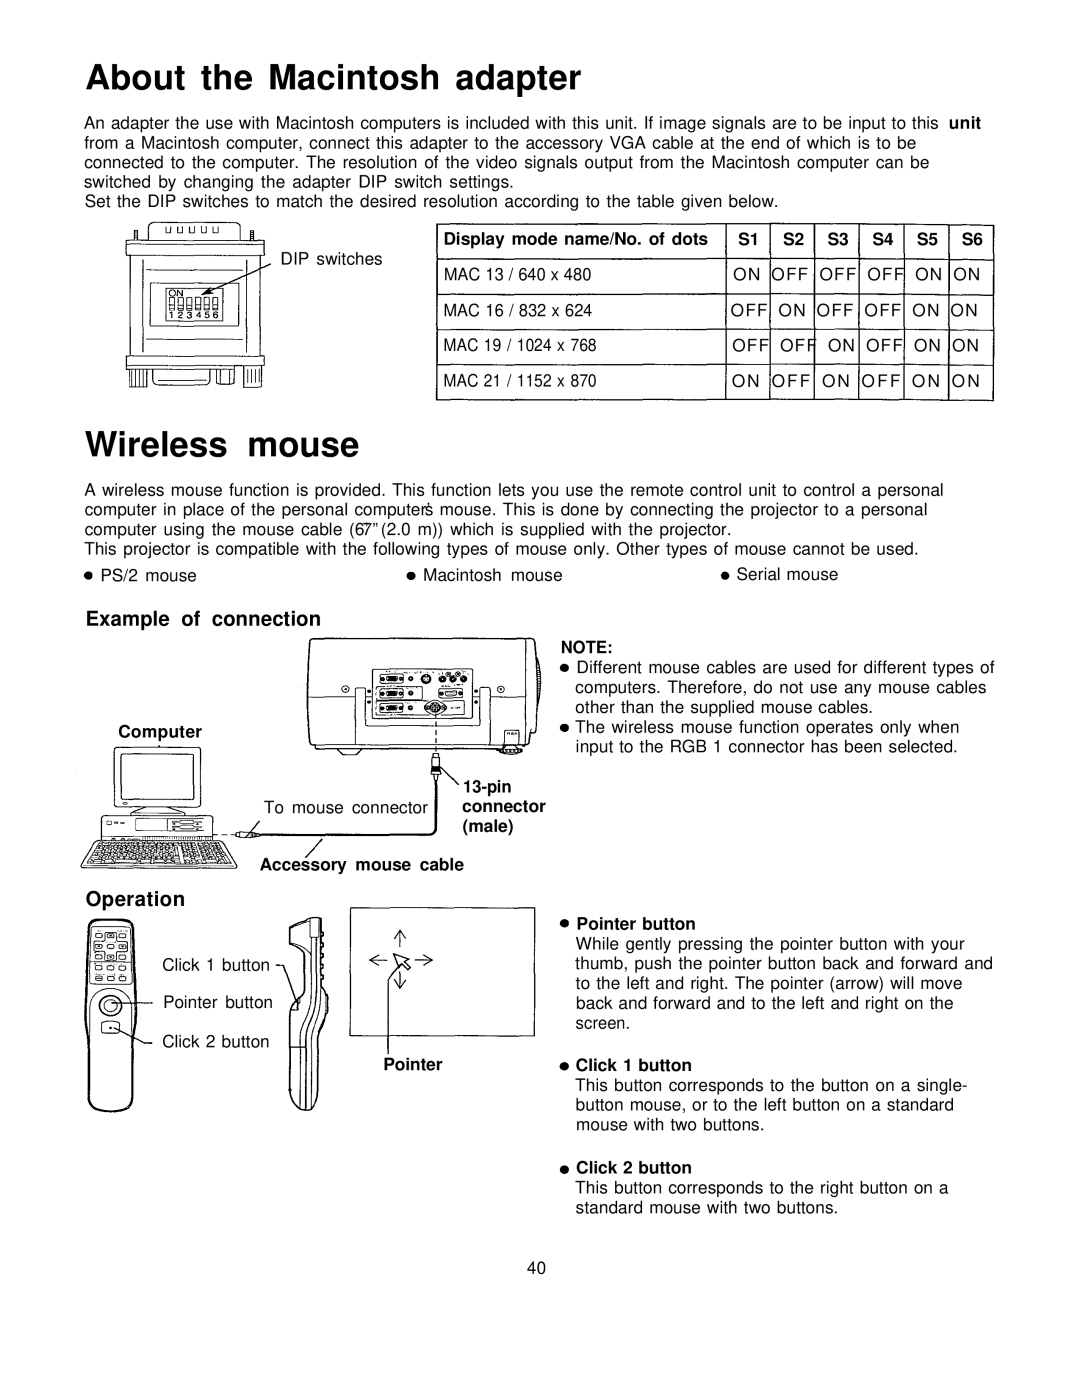 Panasonic PT-L795U manual About the Macintosh adapter, Wireless mouse, Example of connection, Operation 